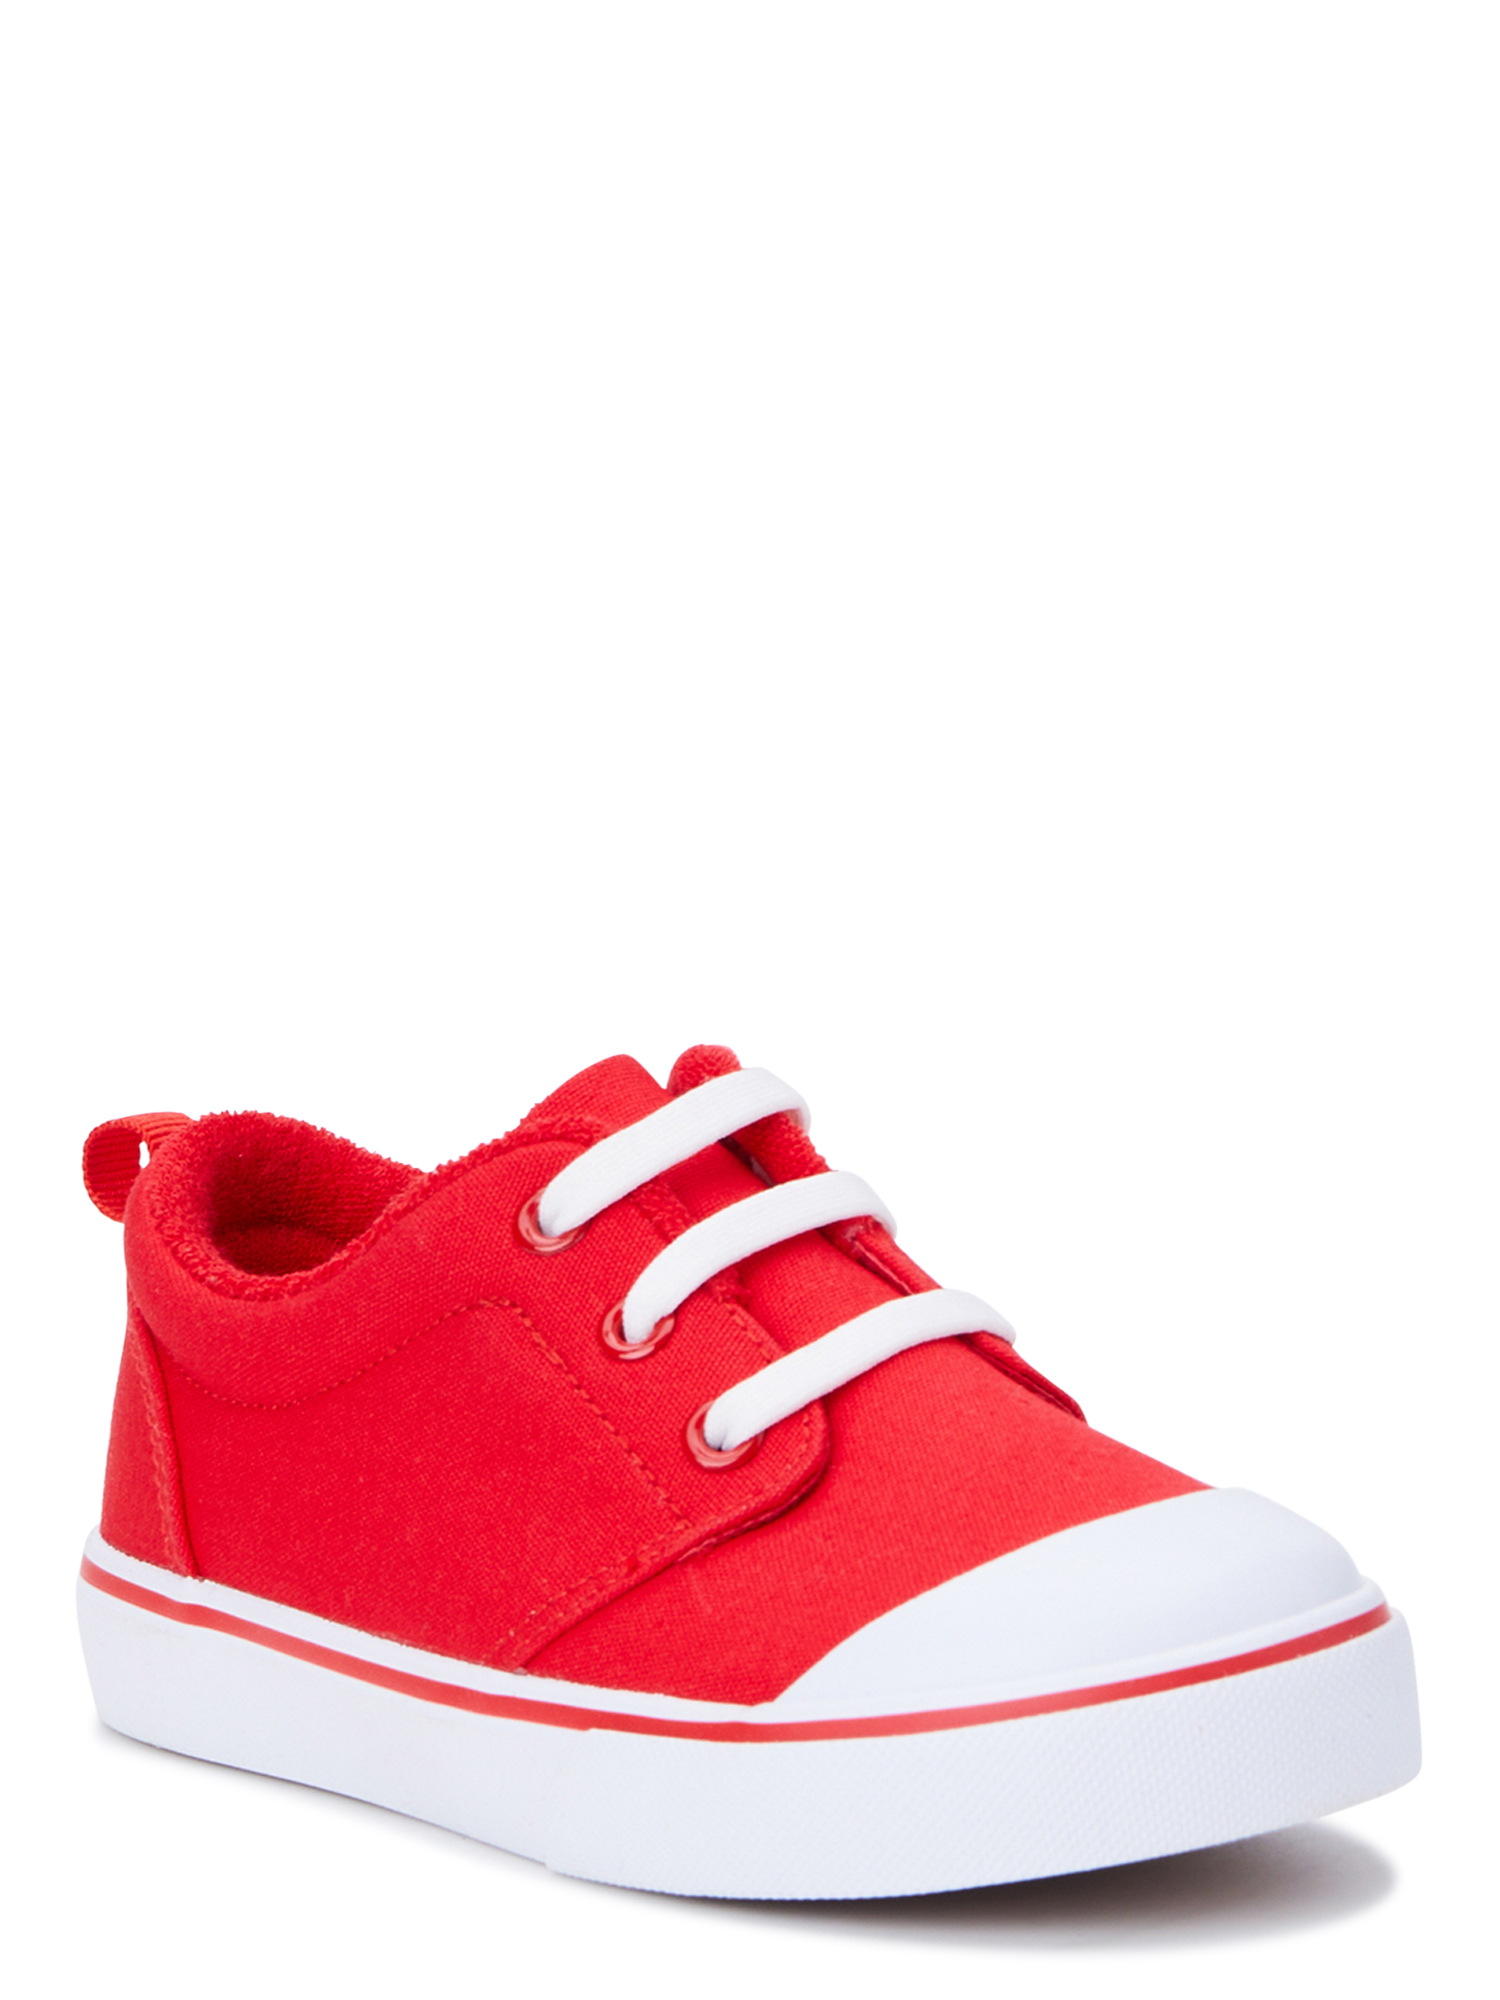 Wonder Nation Toddler Boys Elastic Lace-Up Sneakers, Sizes 7-12